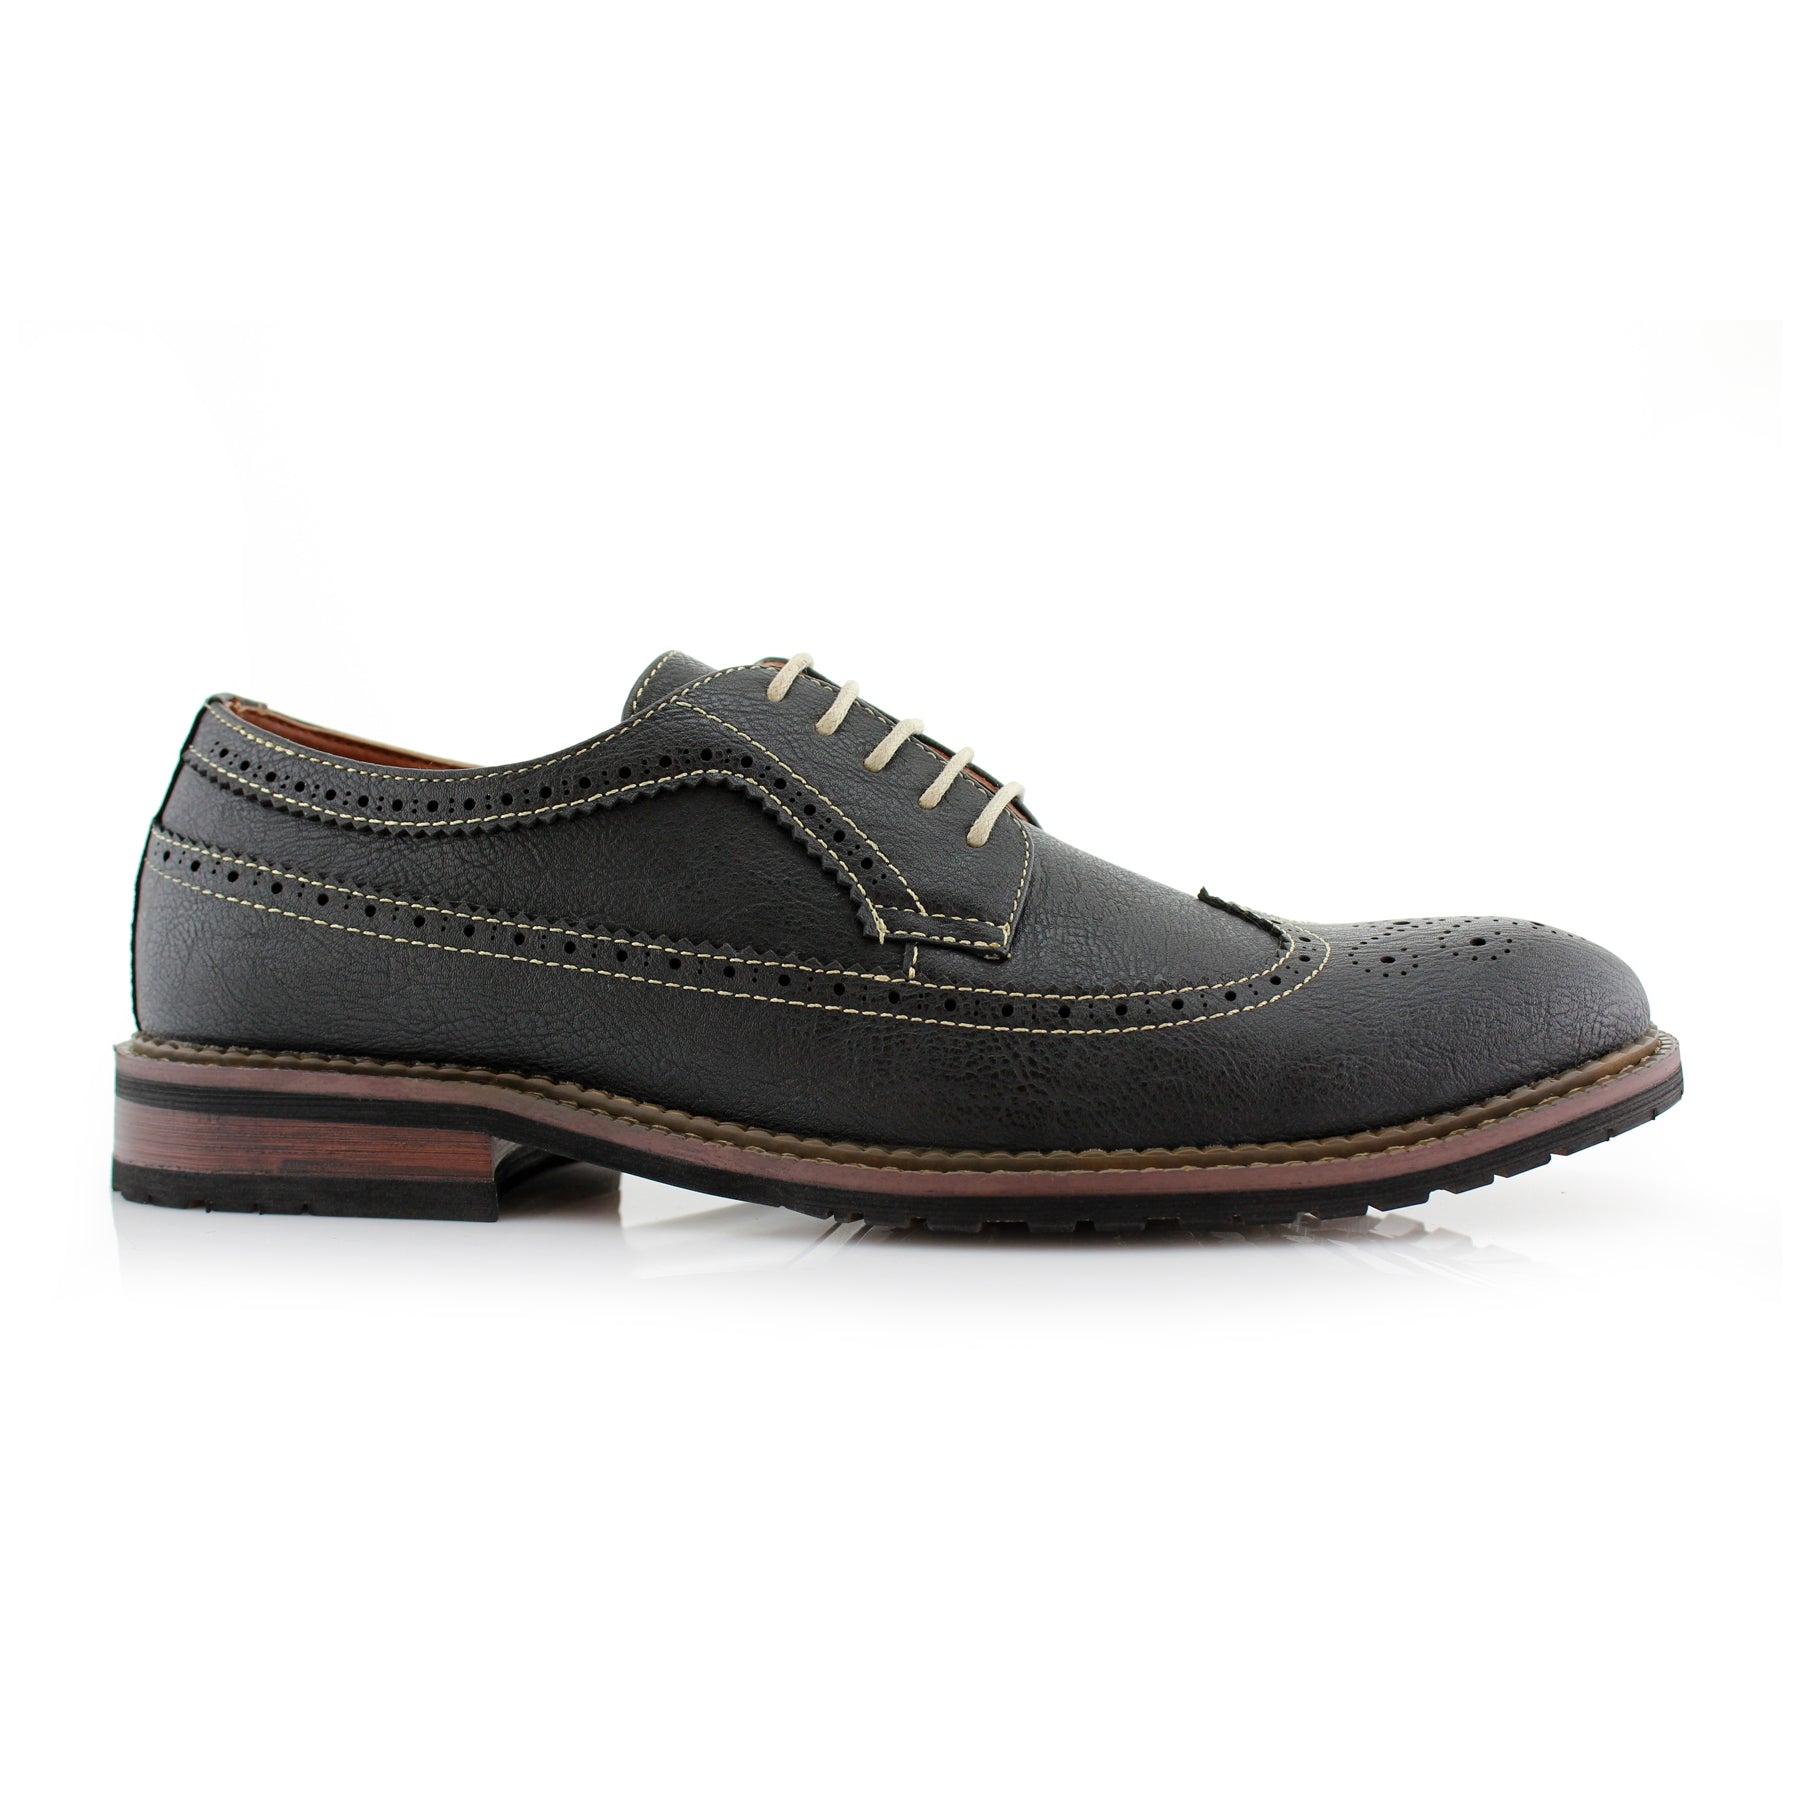 Longwing Brogue Derby Shoes | Phillip by Ferro Aldo | Conal Footwear | Outer Side Angle View